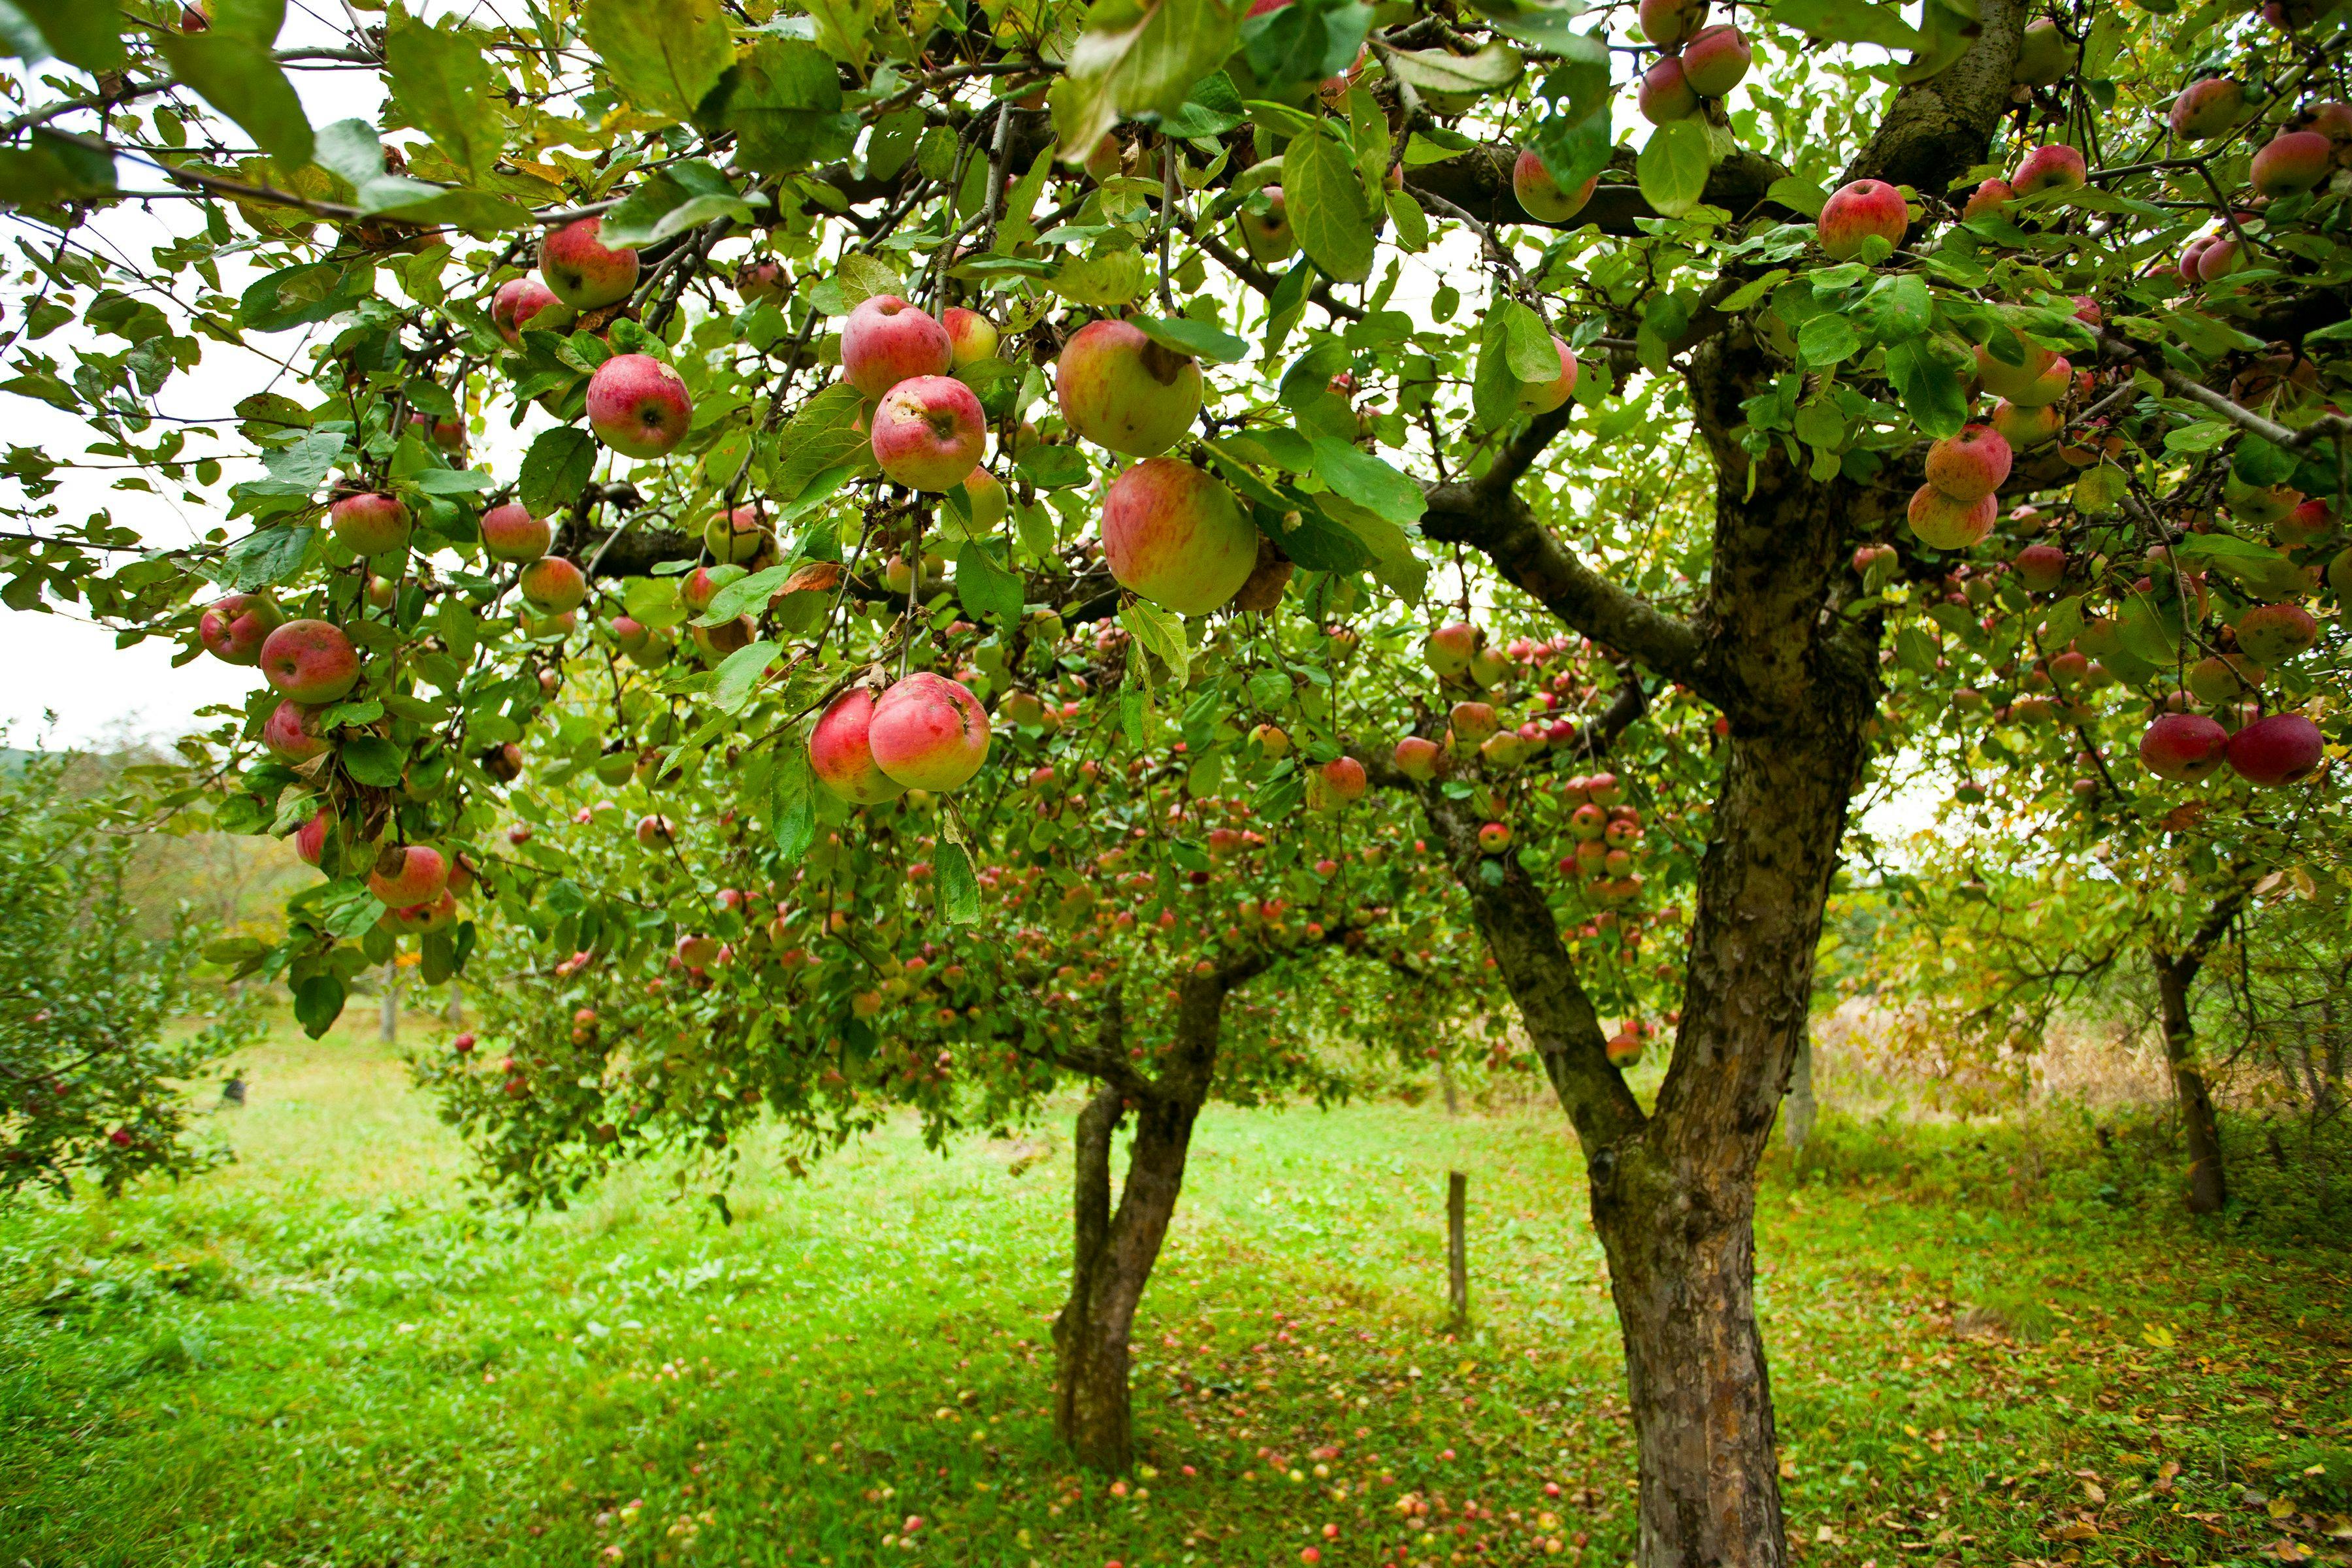 Apple trees with red apples | Image Credit: © Xalanx - stock.adobe.com.